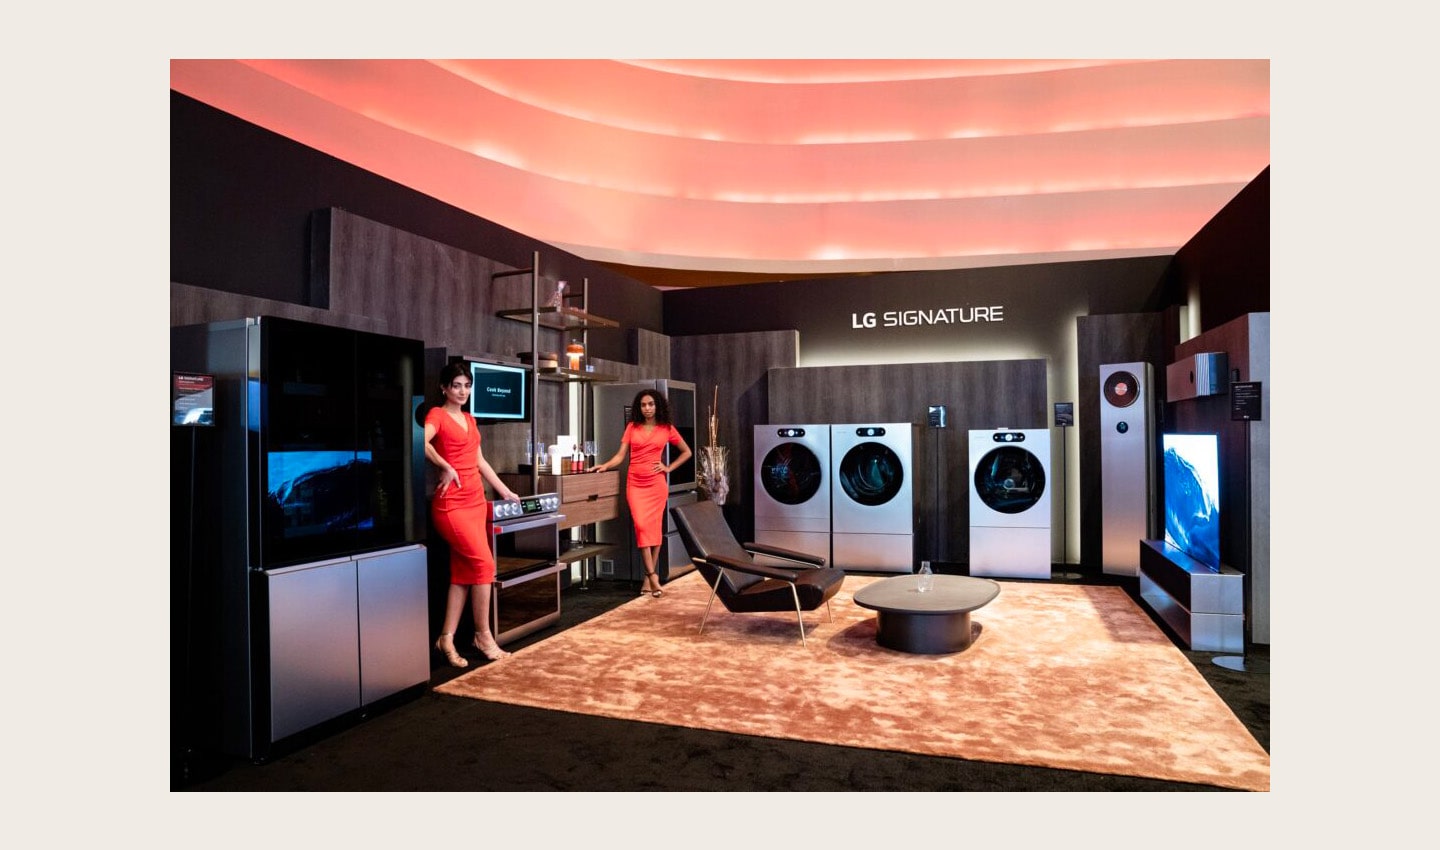 Two models posing with LG SIGNATURE appliances displayed at the renowned Middle East and Africa (MEA) tech event, LG Showcase 2023